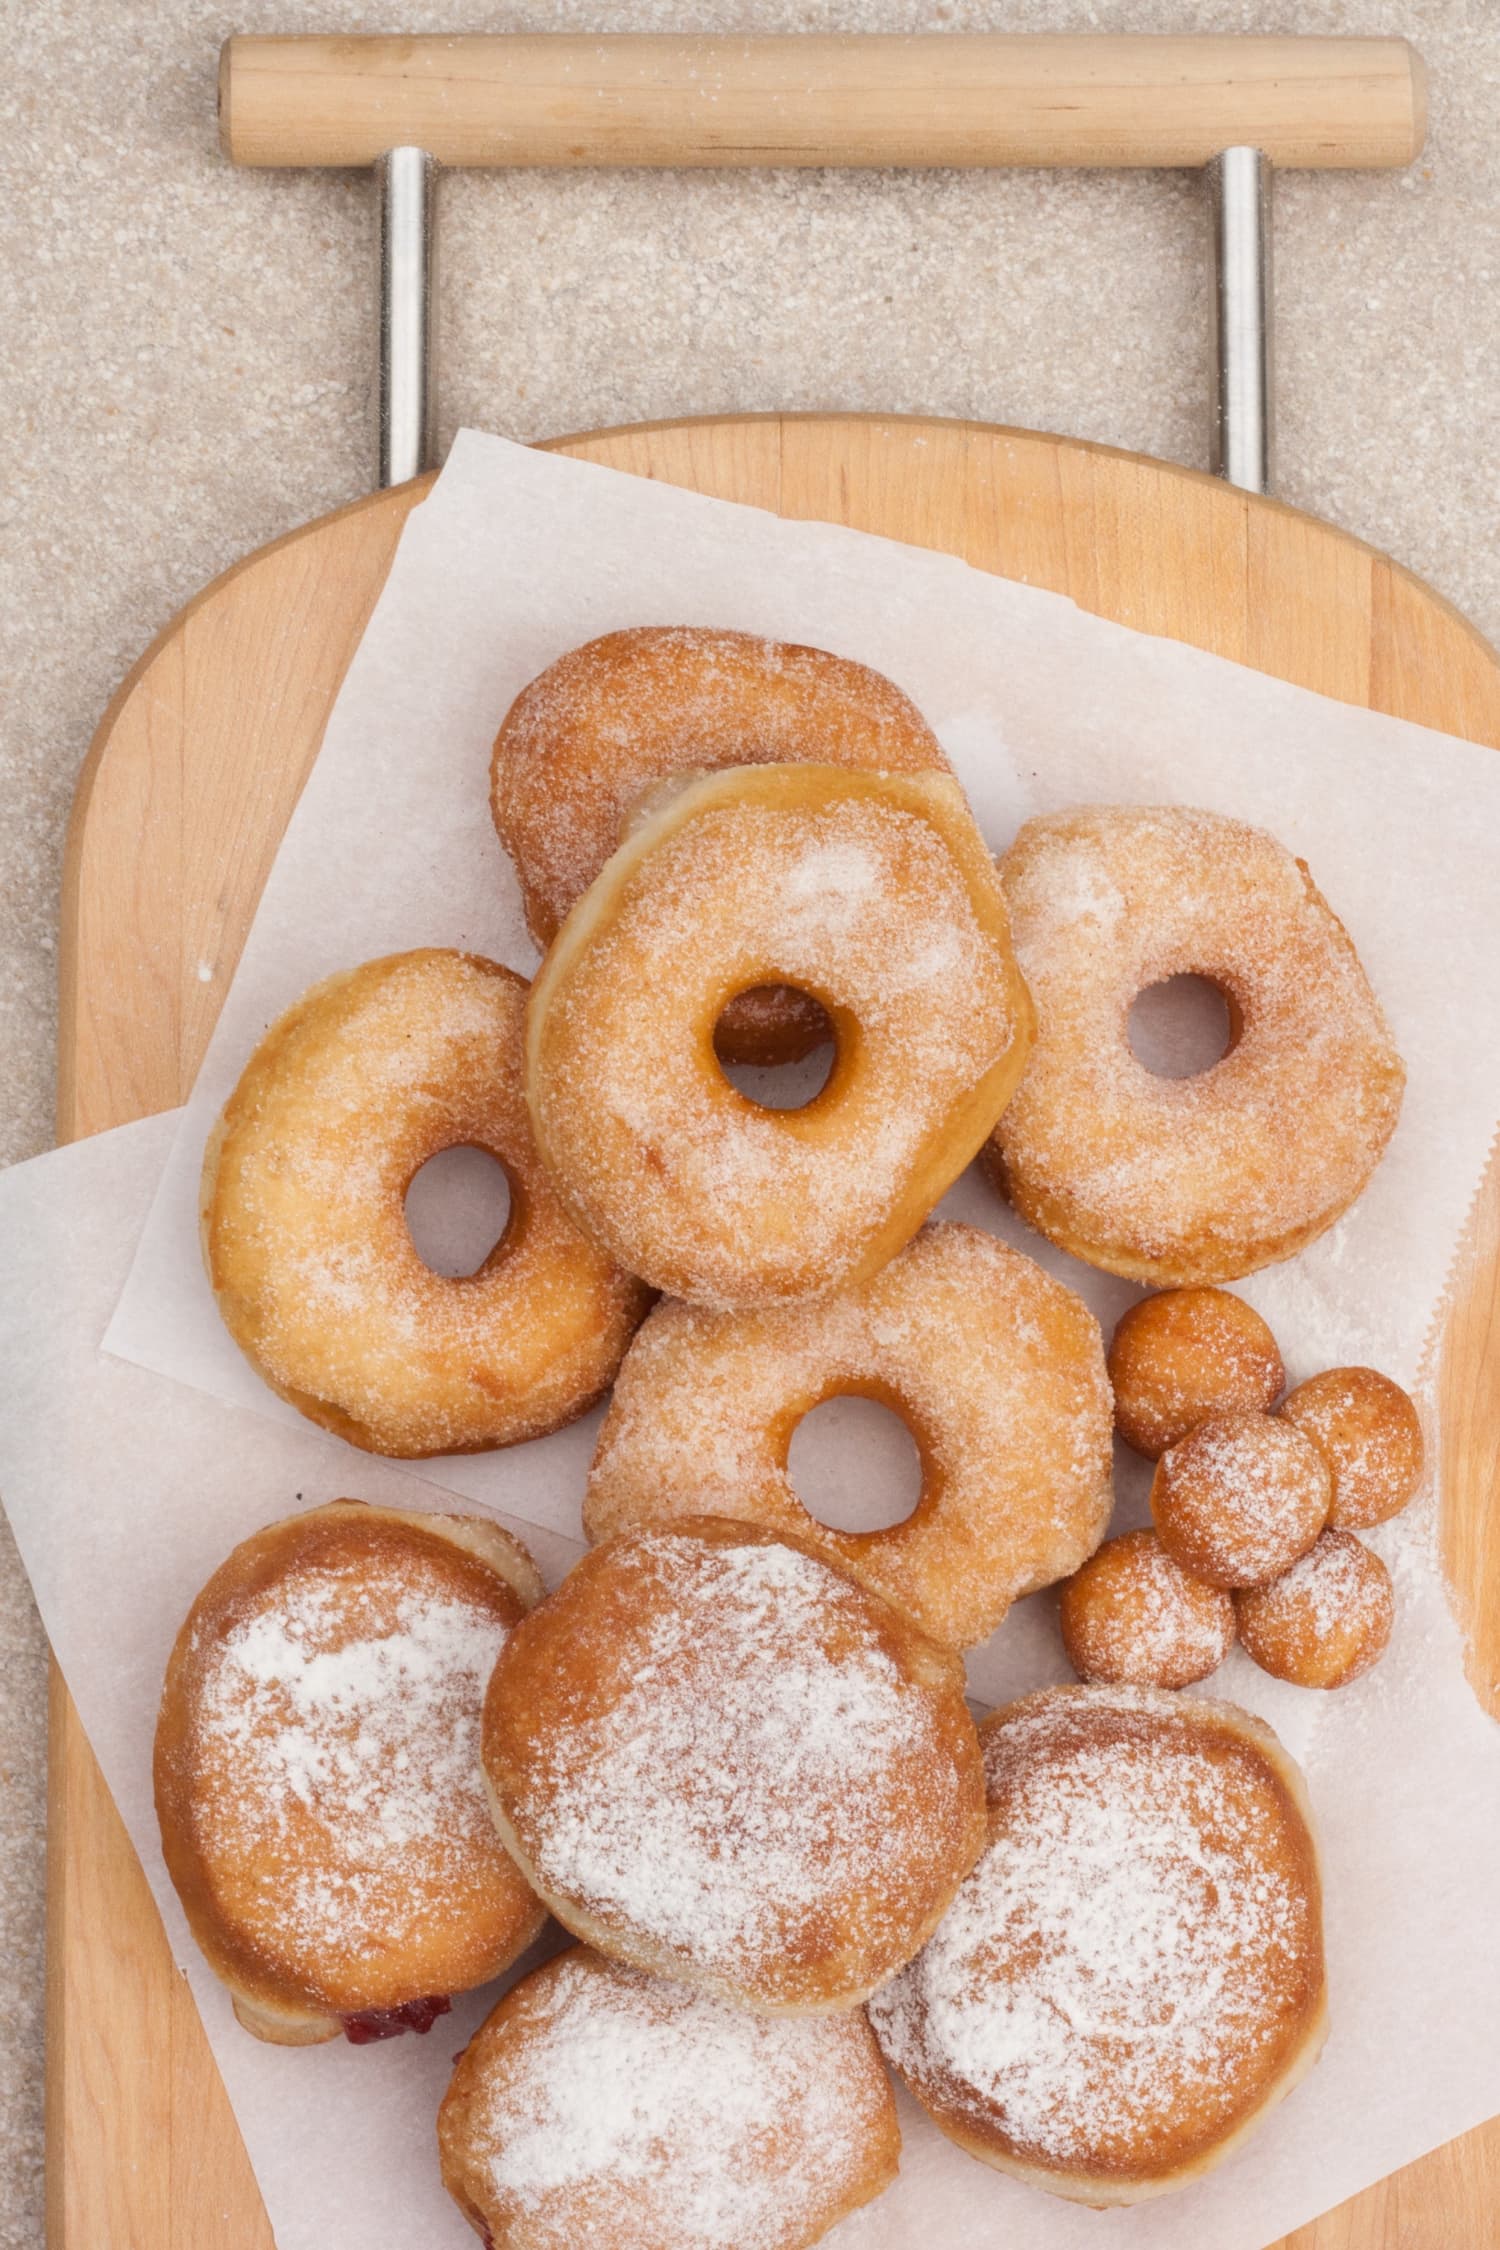 These Are the Easiest Doughnuts You’ll Ever Make